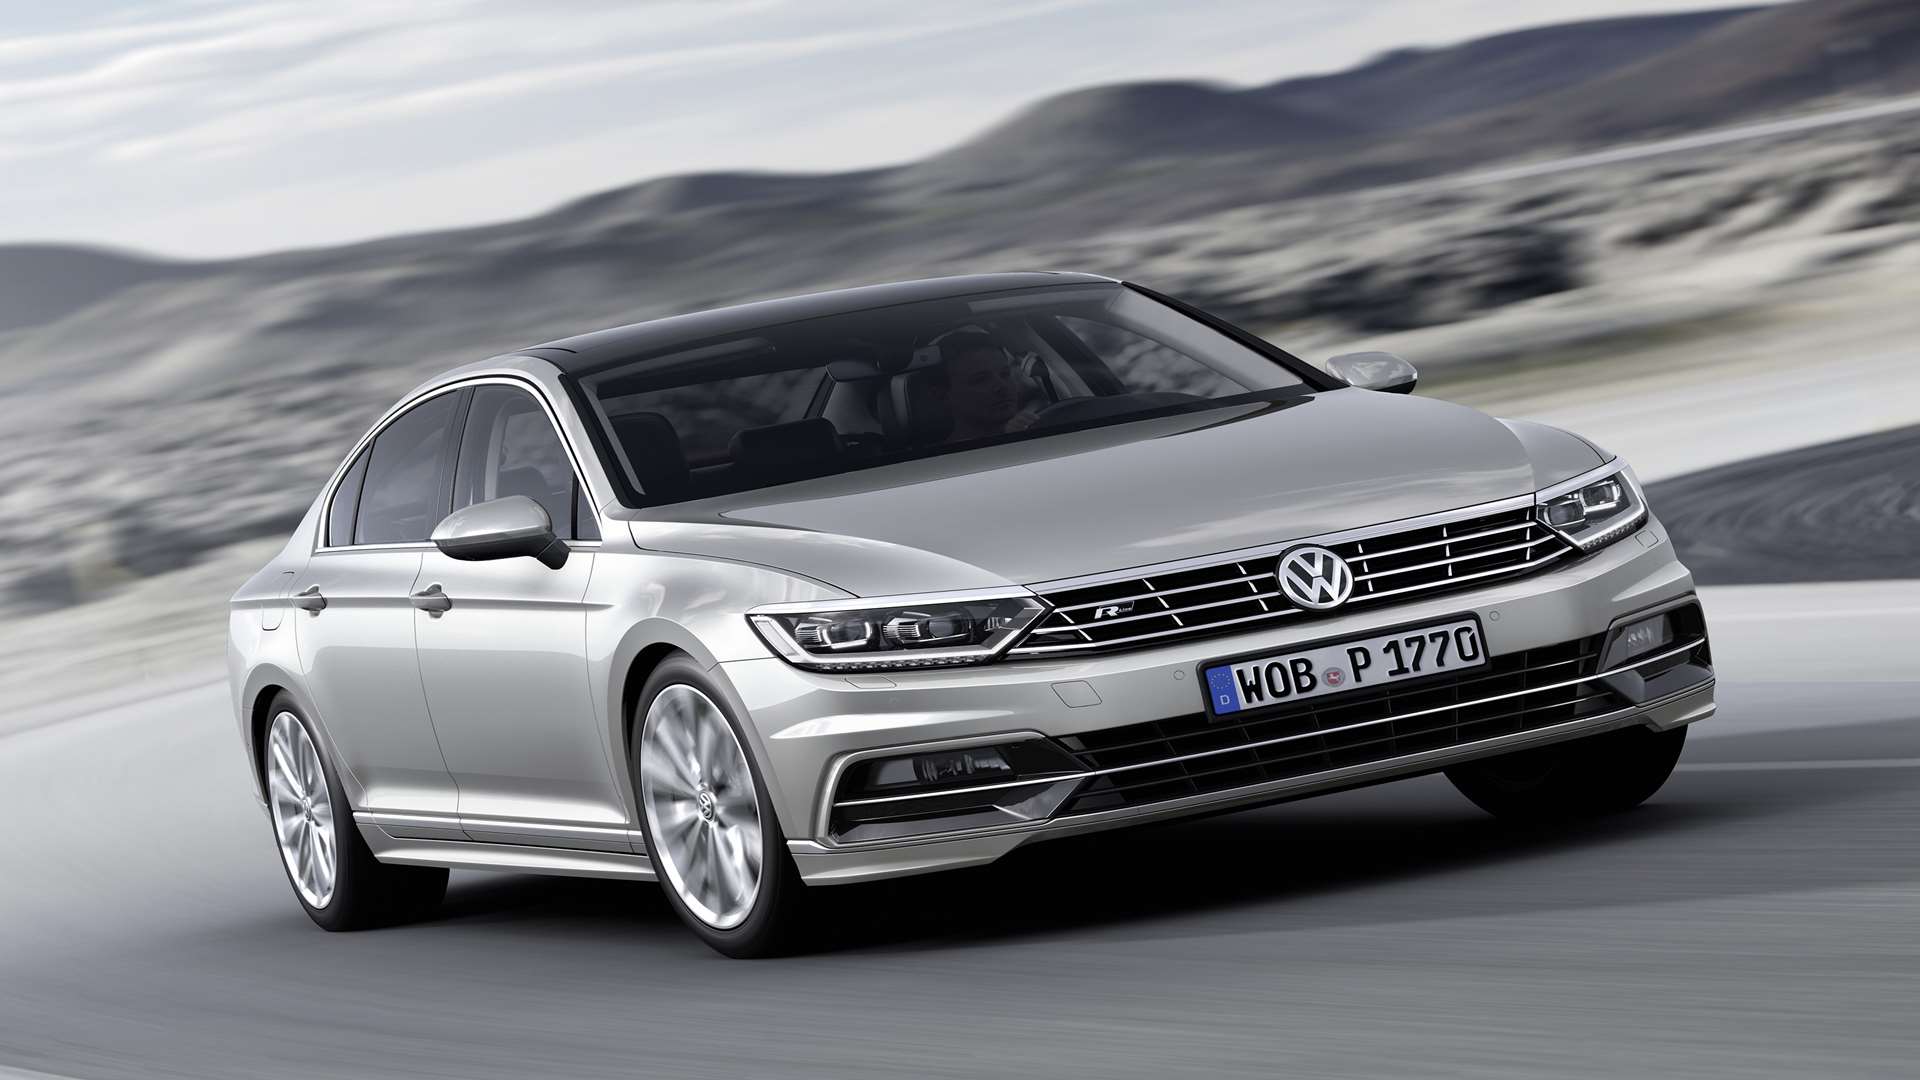 Changes give the new Passat a sportier, more dynamically fluid appearance